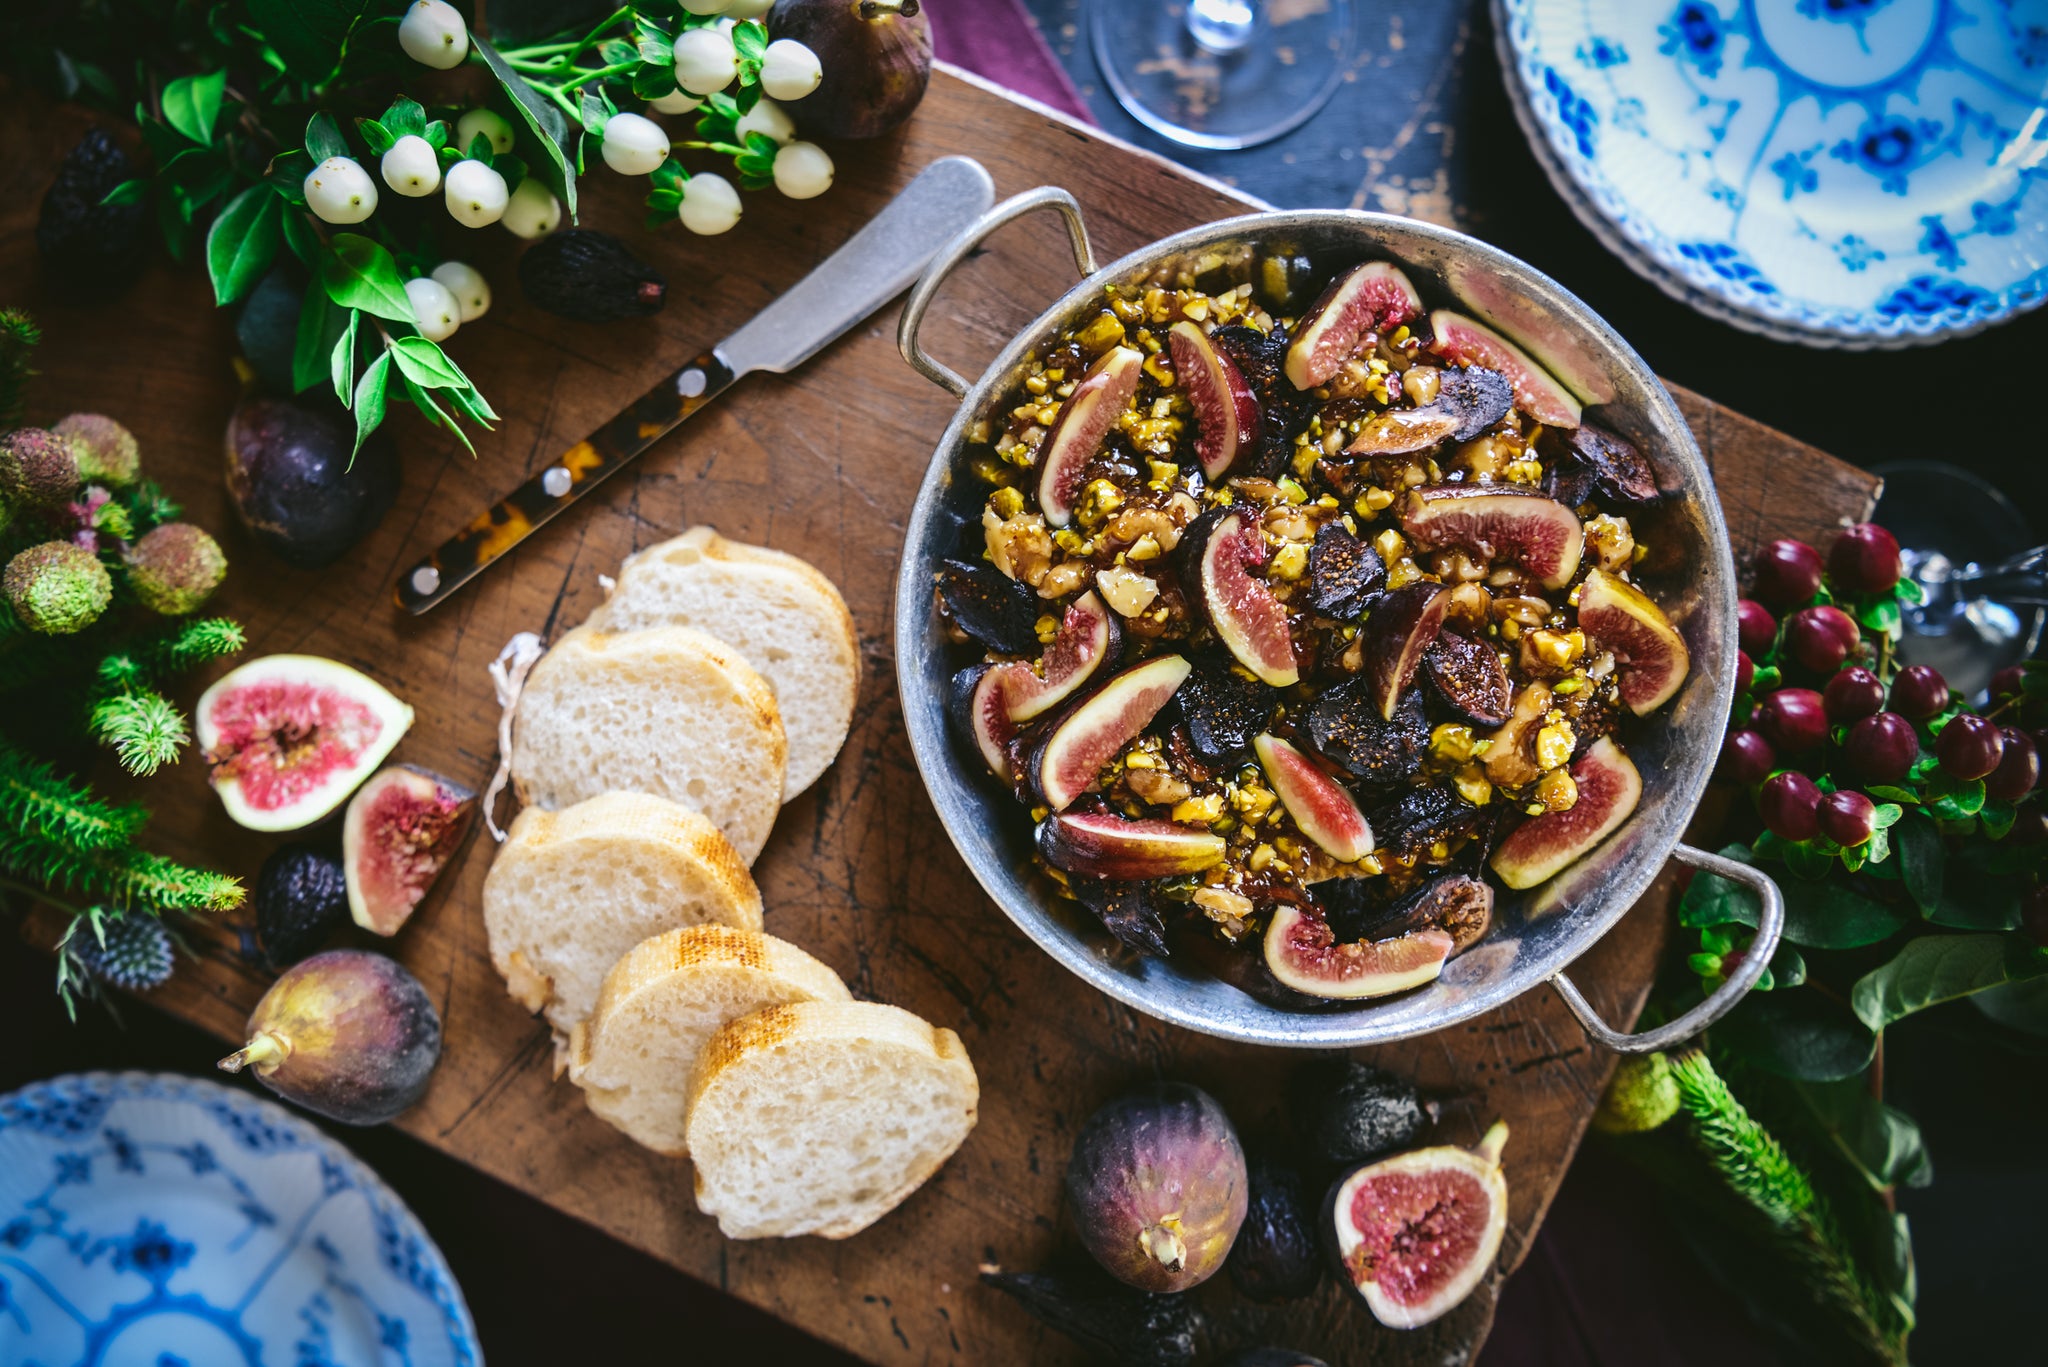 Brie with Figs, Pistachios, and Walnuts | Weston Table